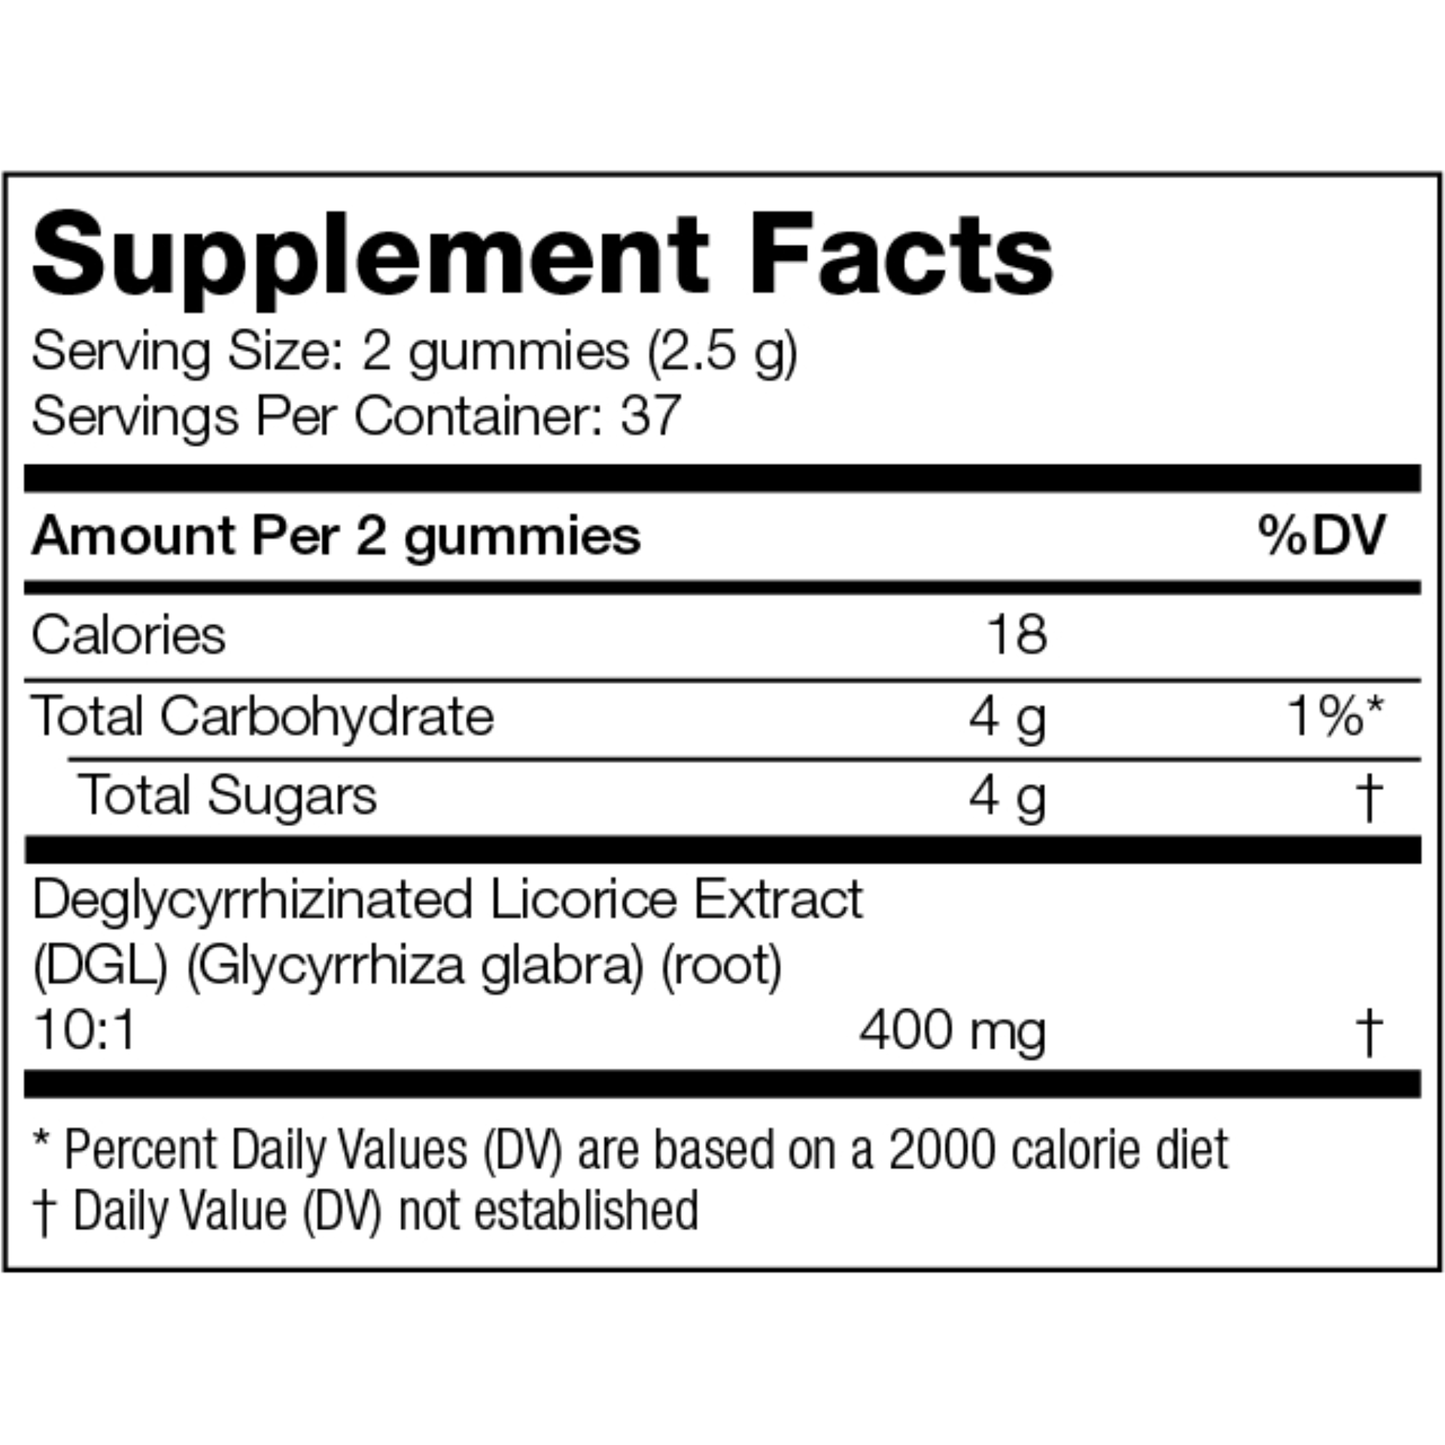 DGL Stomach Soothe Gummies (Currently on Back Order with Manufacturer)